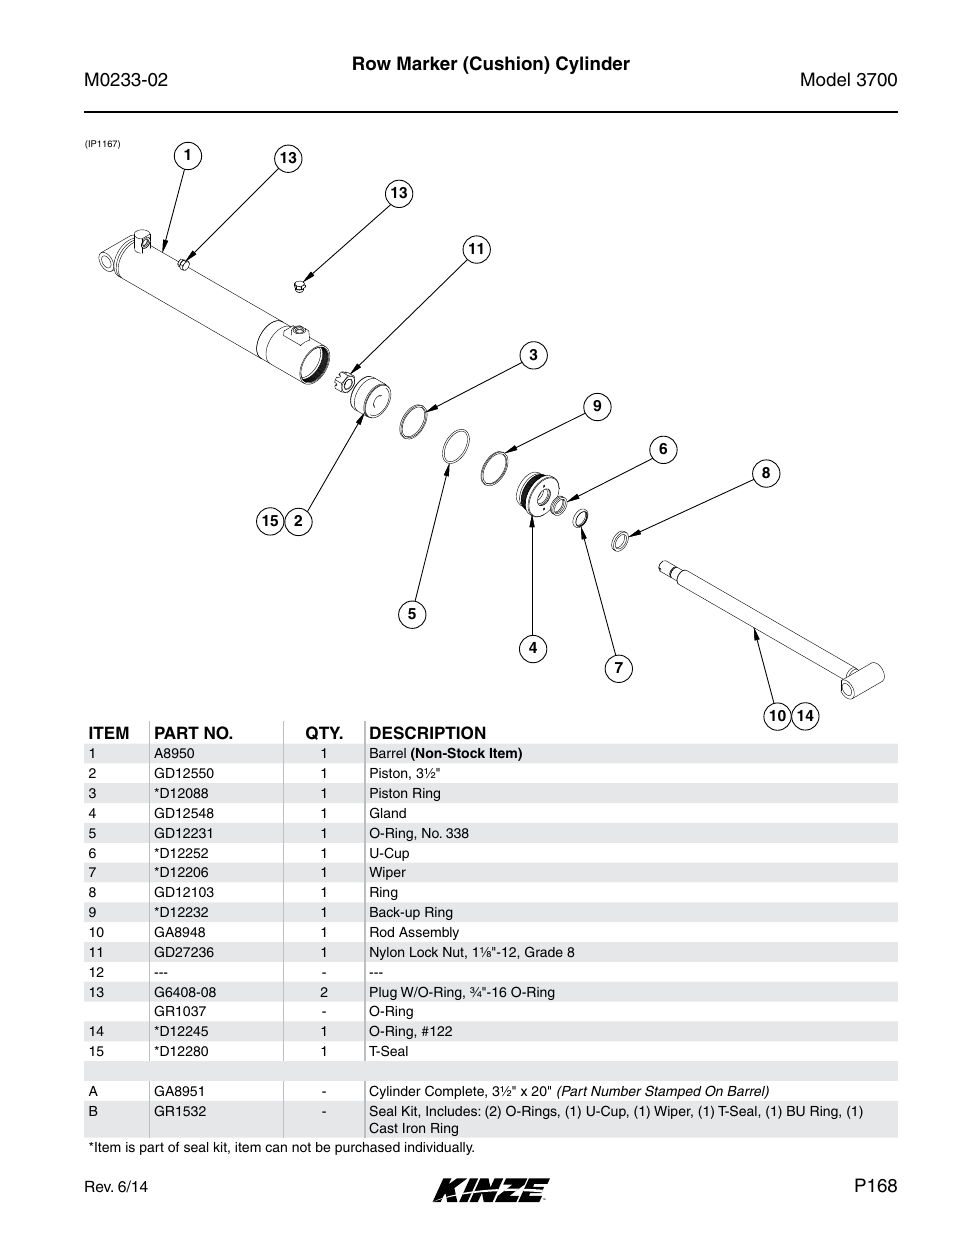 Row marker (cushion) cylinder, P168 | Kinze 3700 Front Folding Planter Rev. 6/14 User Manual | Page 171 / 284